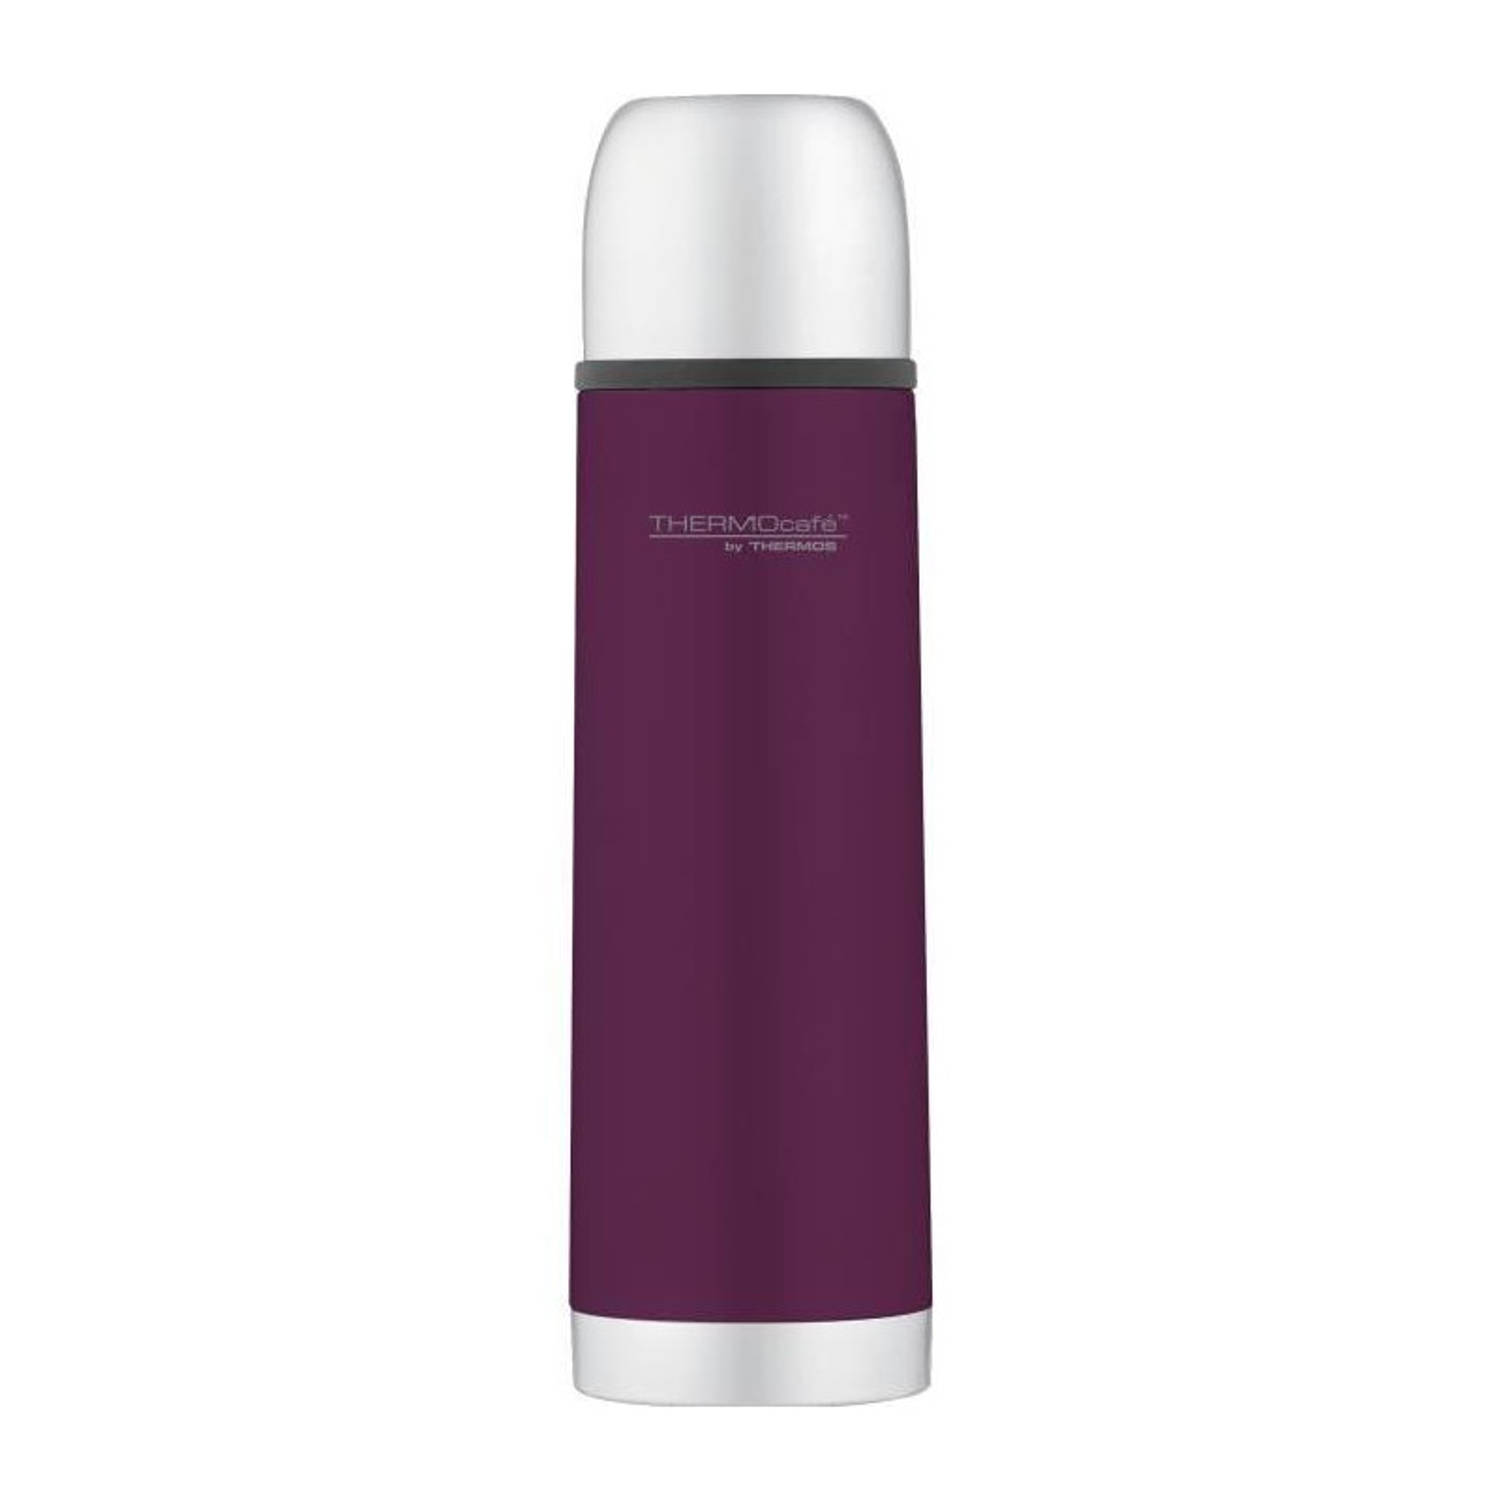 Thermos Soft Touch Rvs Isoleerfles - 0,5 Liter - Paars